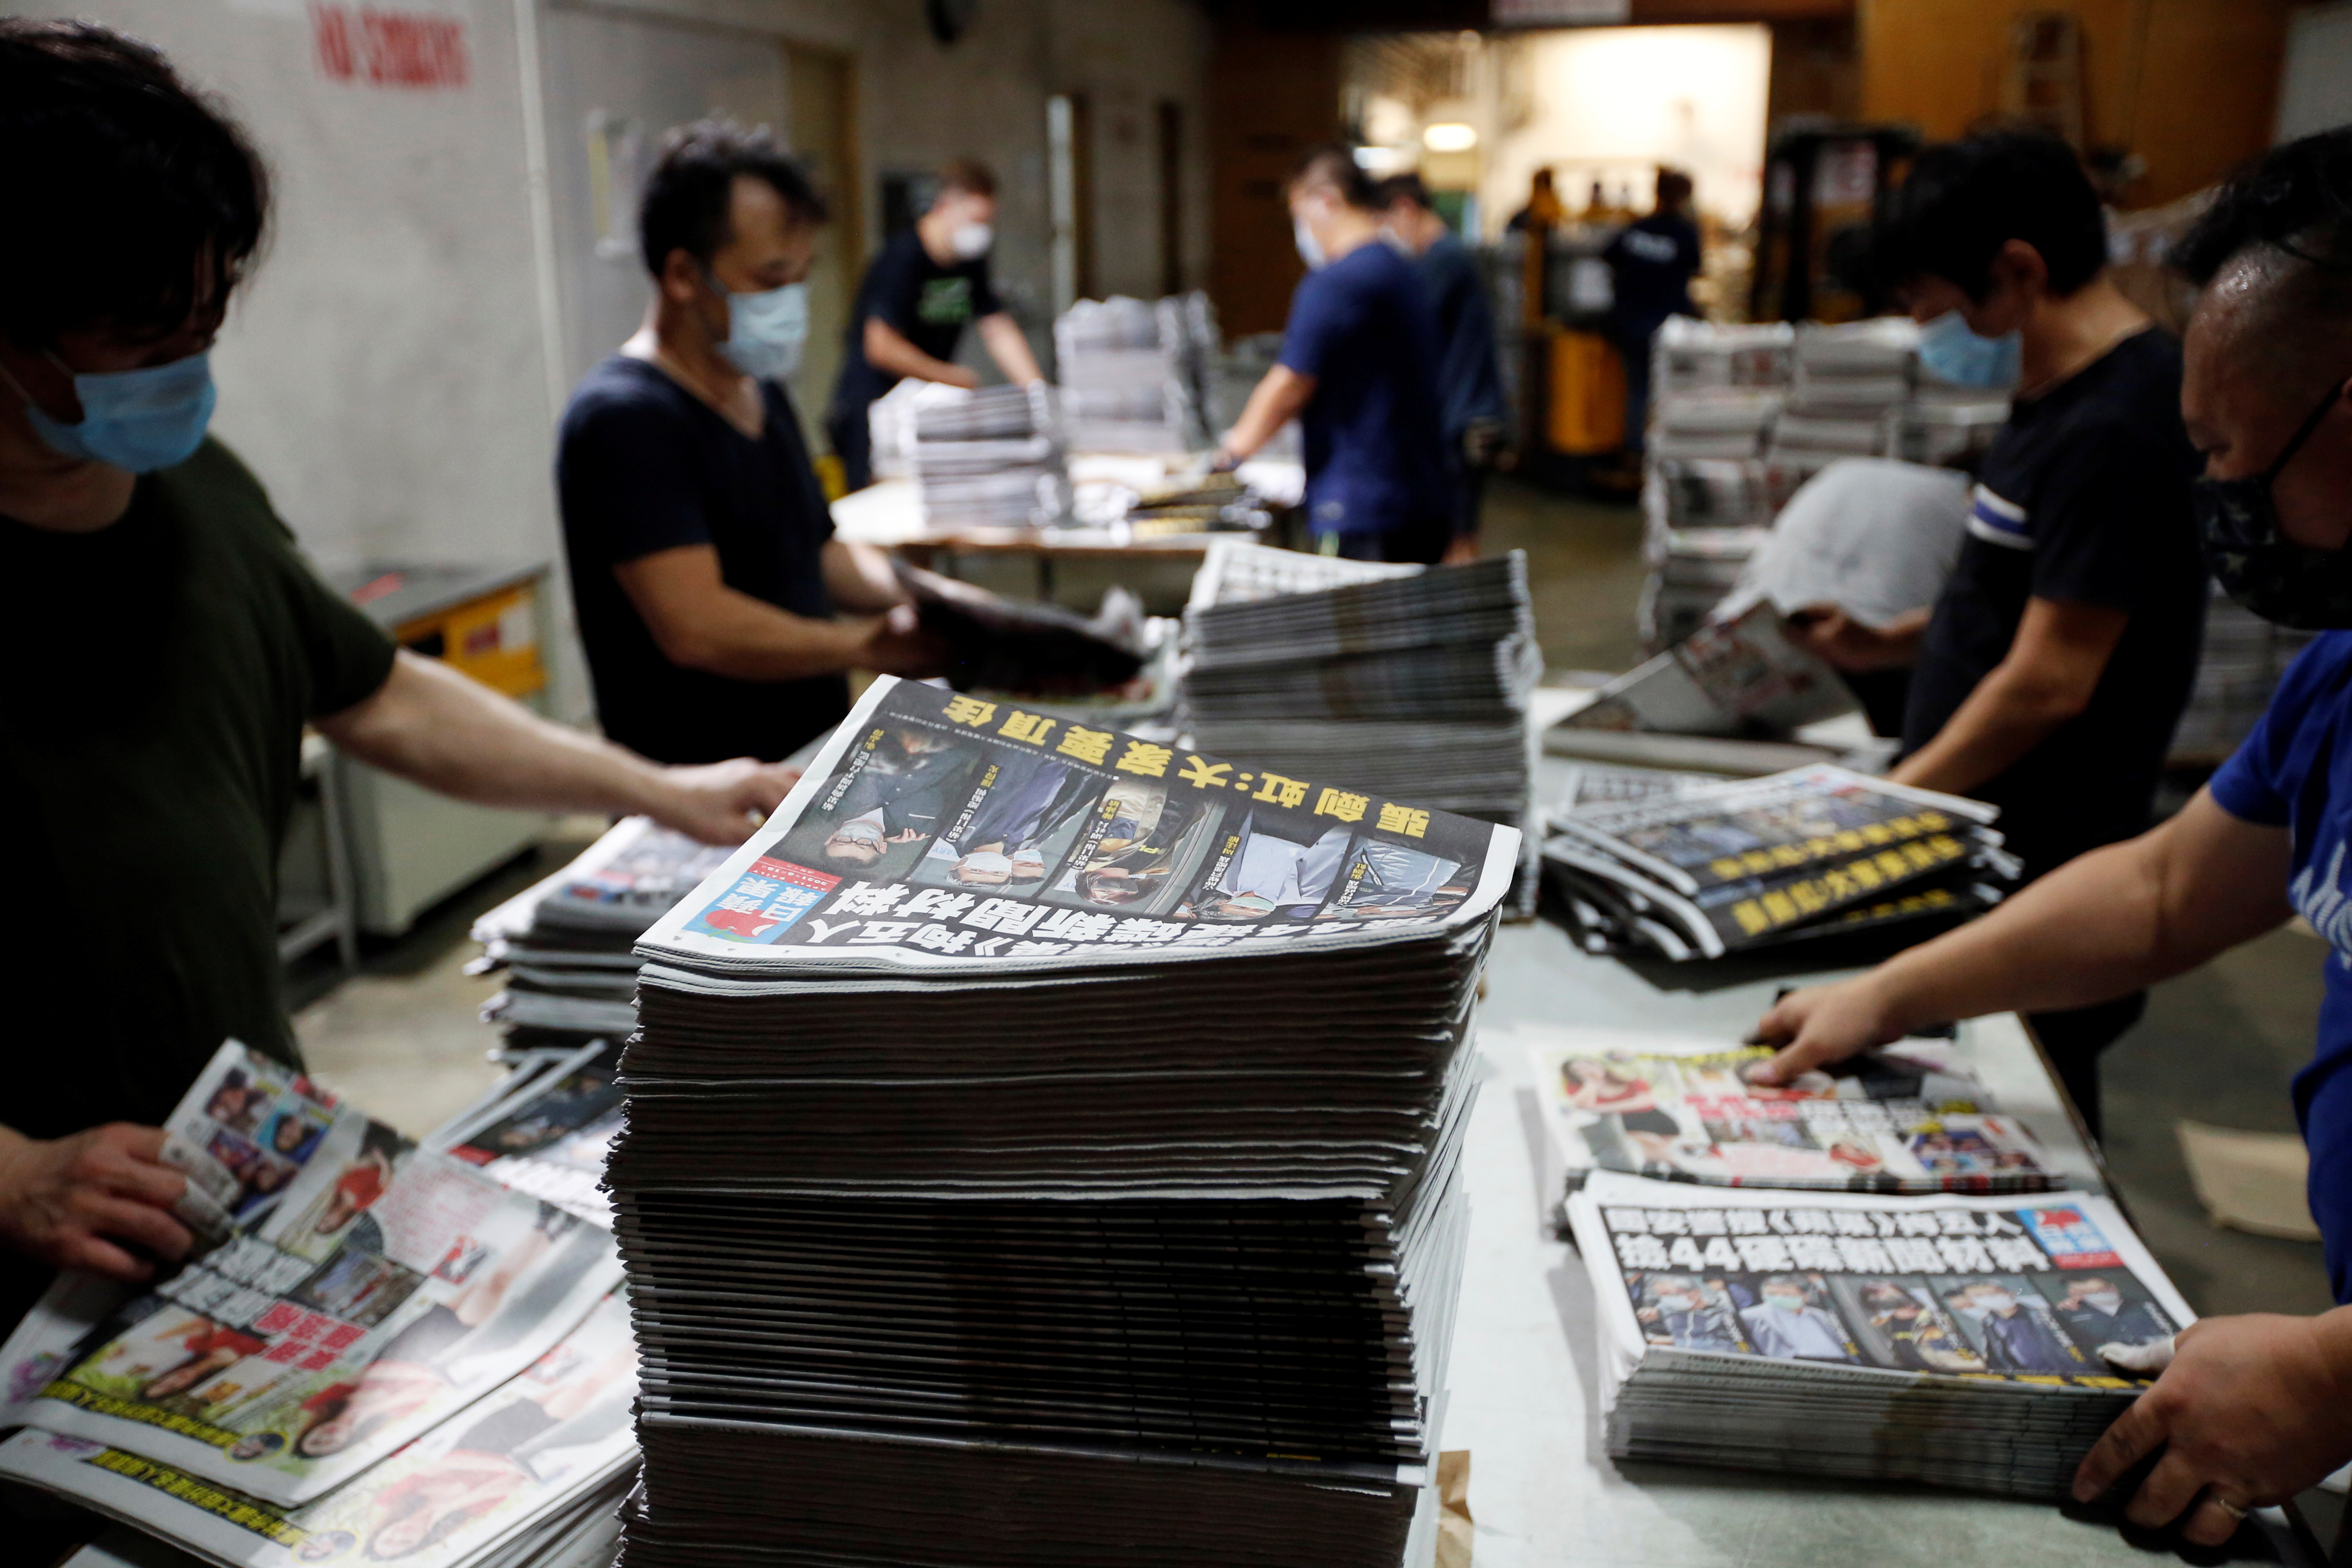 Workers prepare copies of Apple Daily newspaper at its printing facility for distribution after police raided its newsroom and arrested five executives the day before, in Hong Kong, China early June 18, 2021. REUTERS/James Pomfret